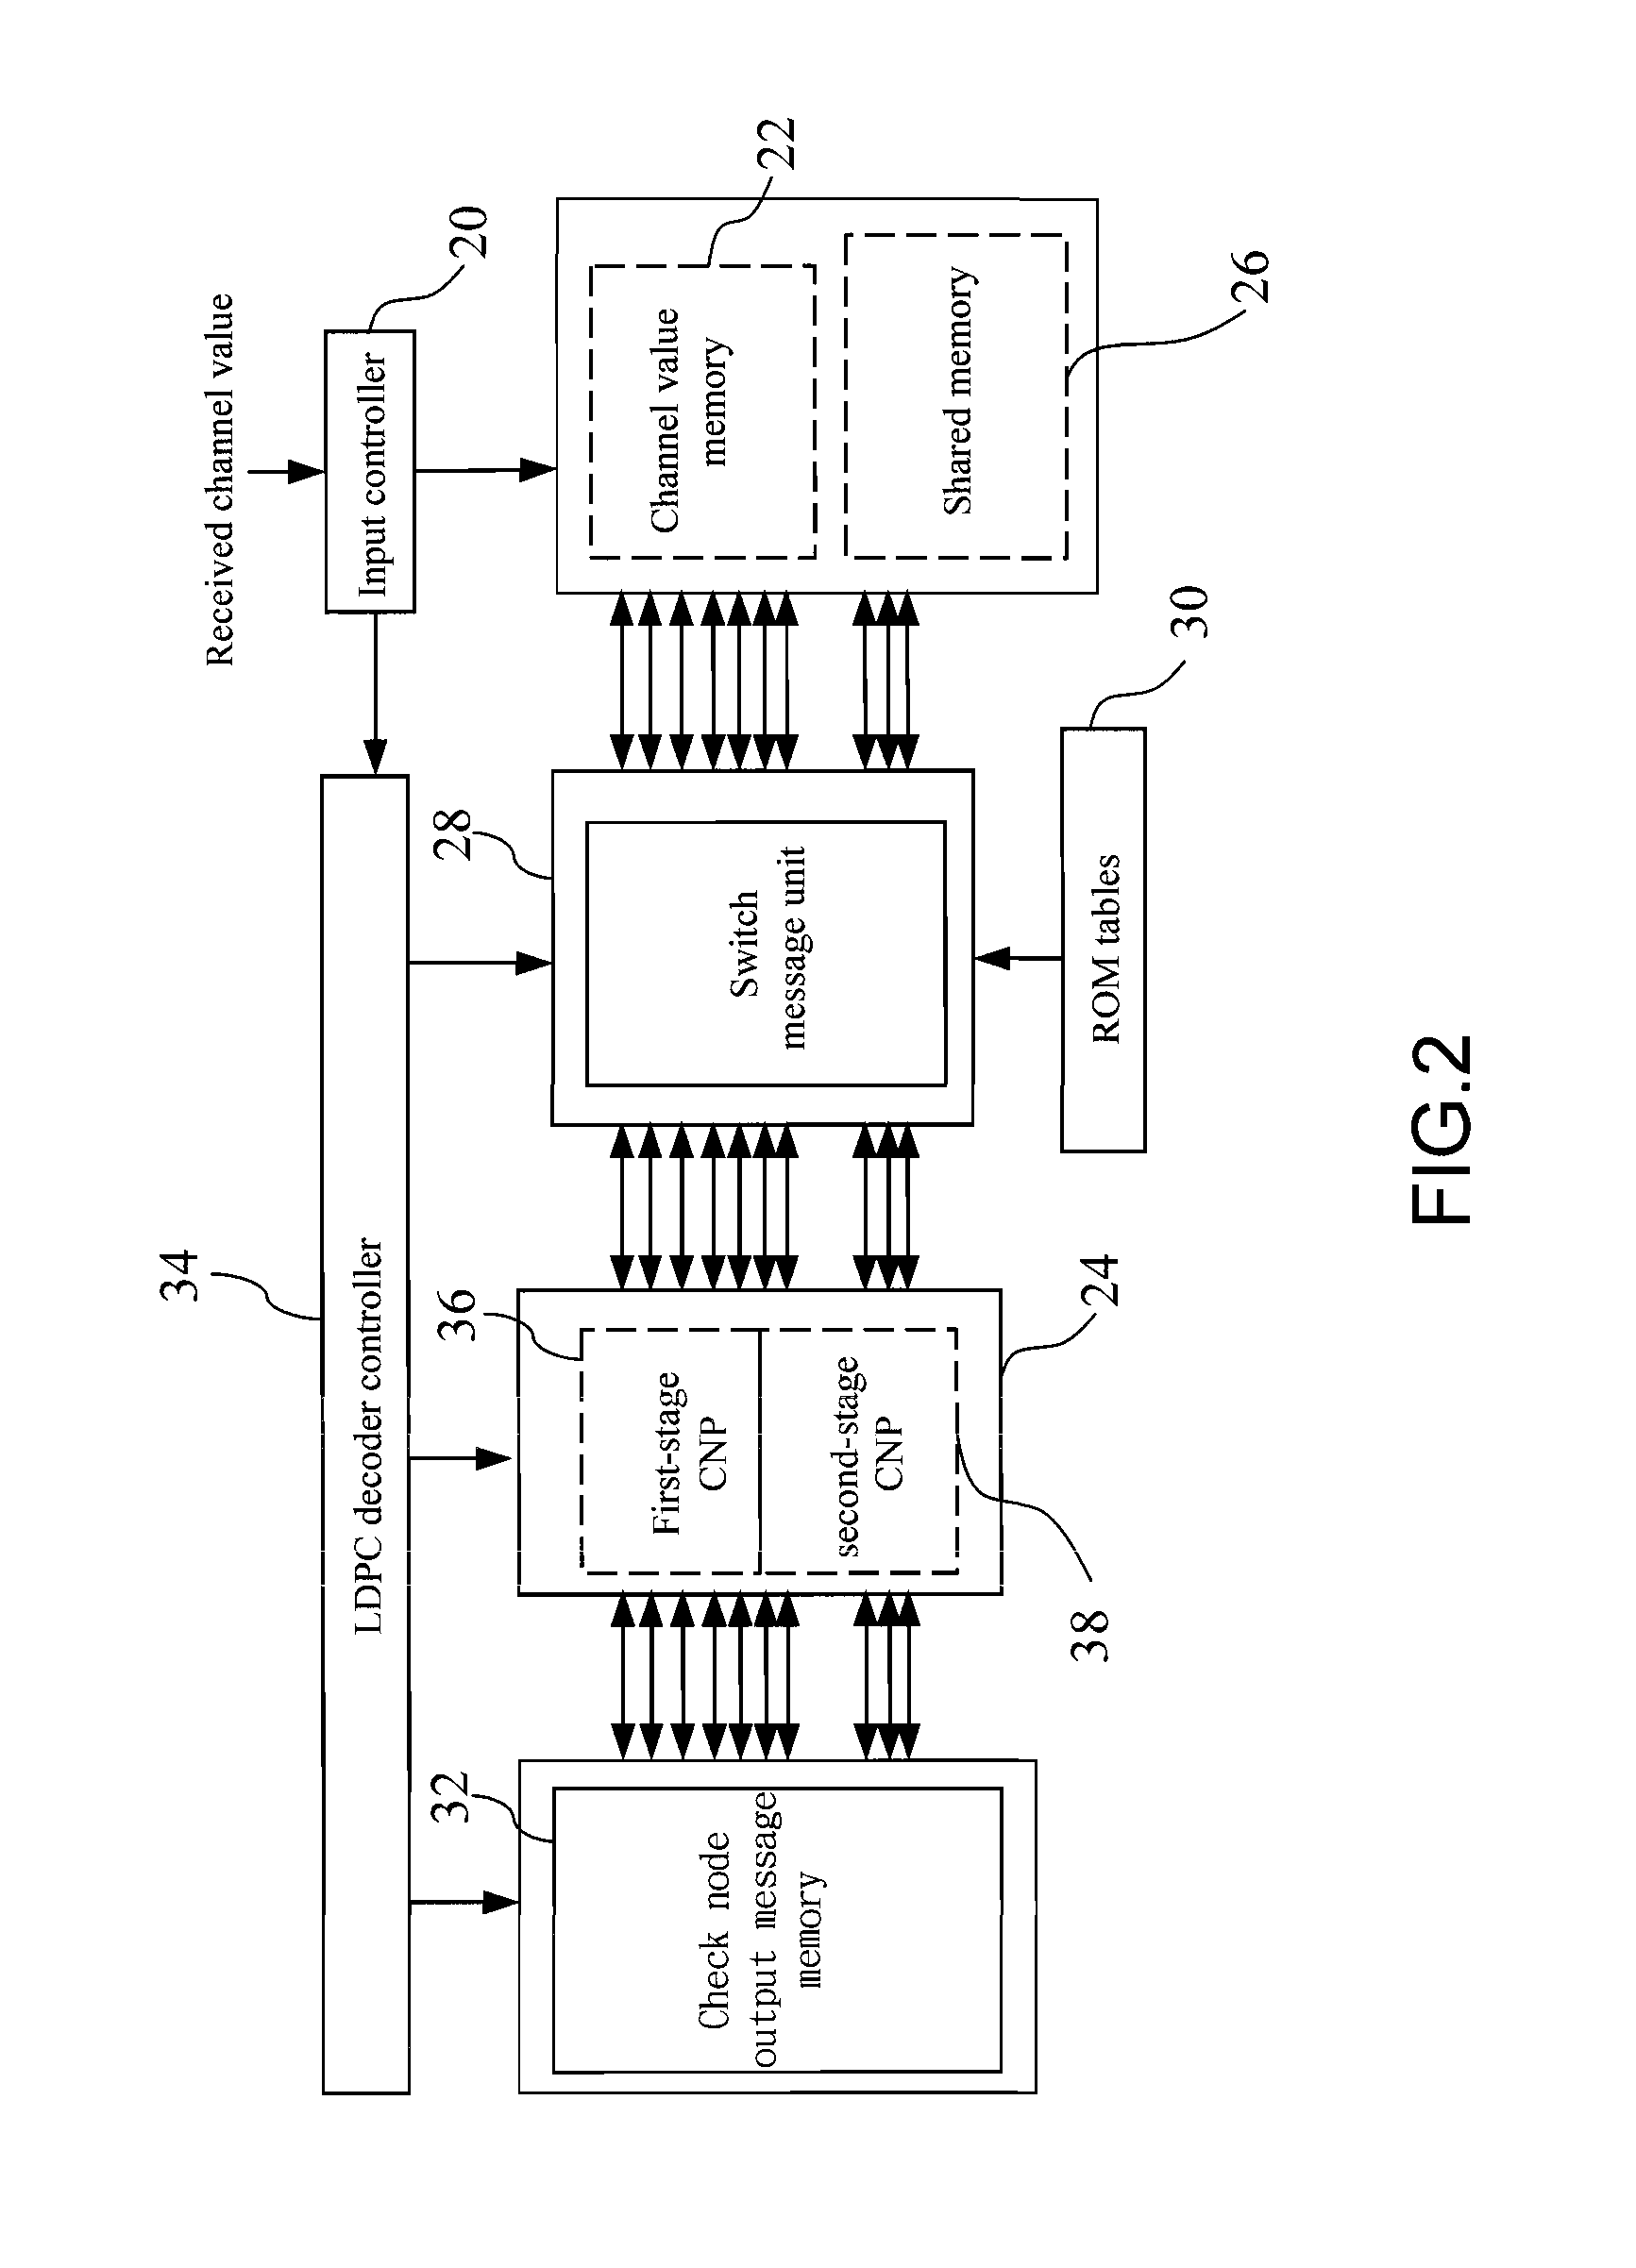 Operating method applied to low density parity check (LDPC) decoder and circuit thereof